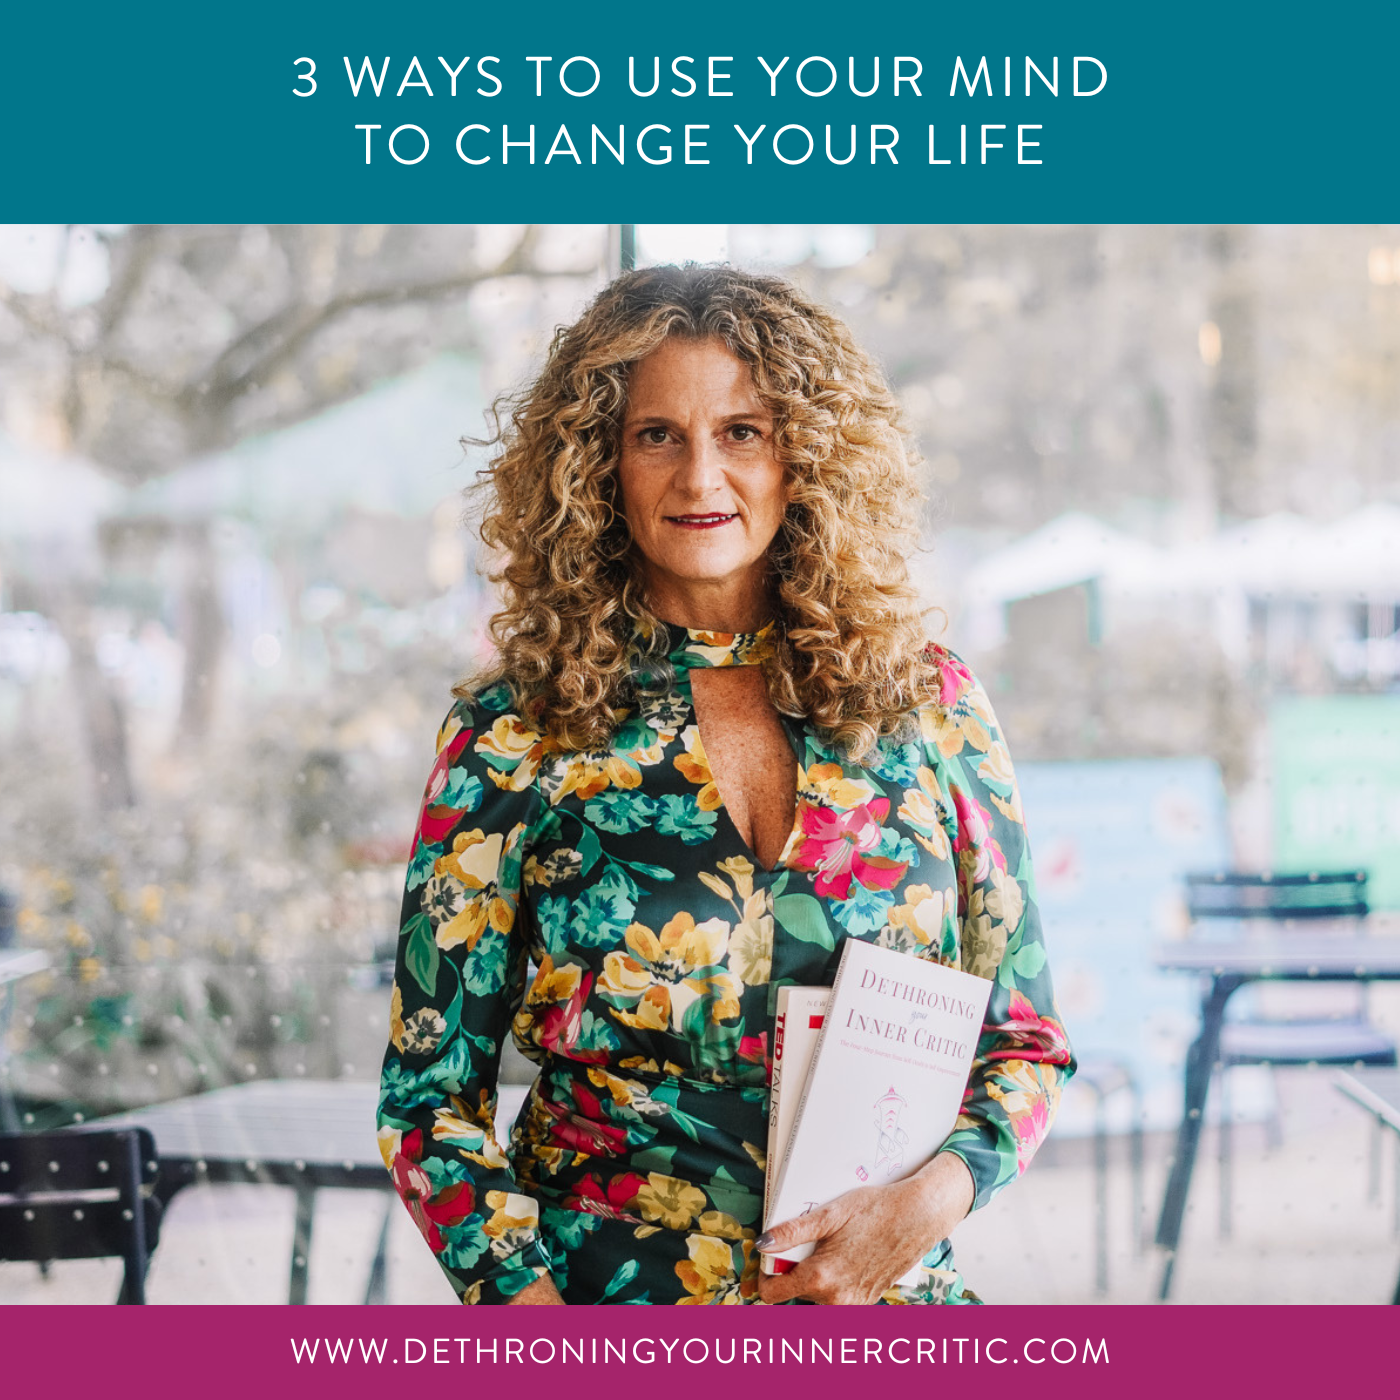 3 Ways to Use Your Mind to Change Your Life